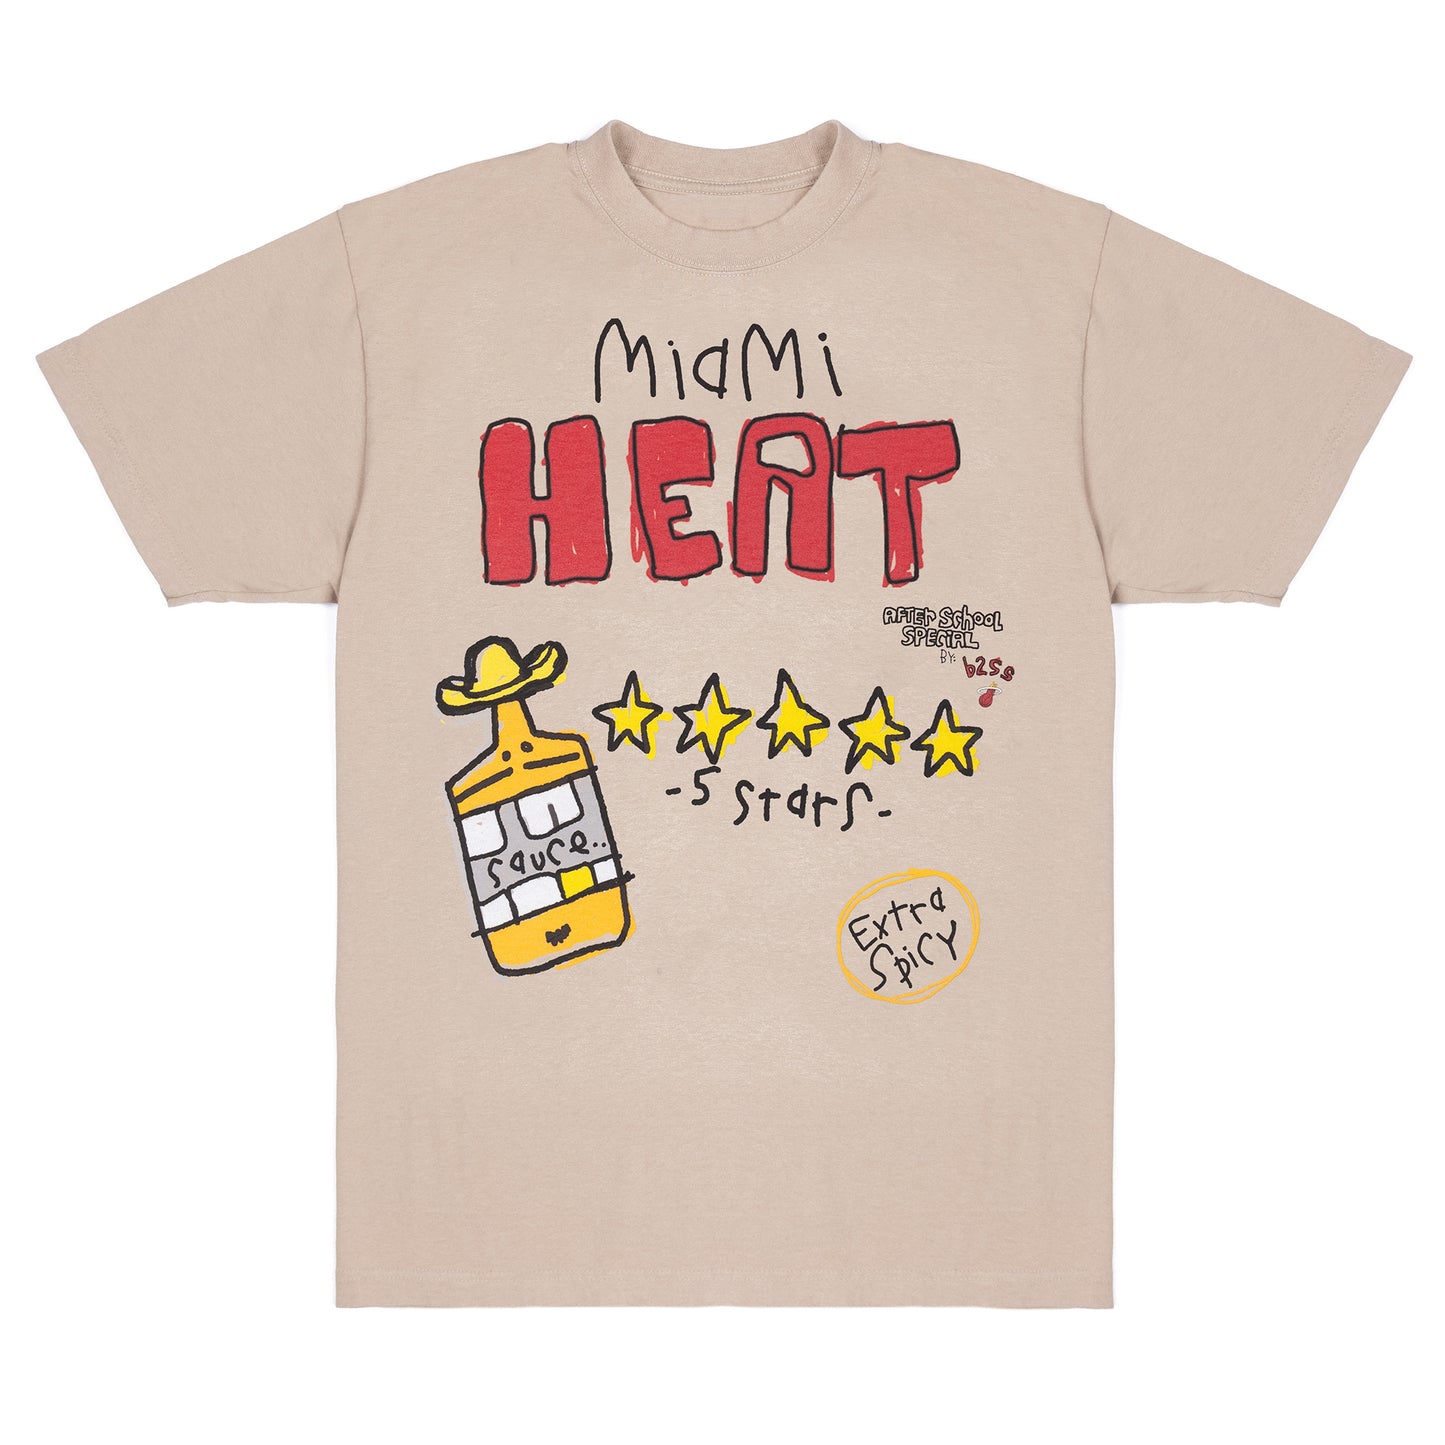 AFTER SCHOOL SPECIAL: MIAMI HEAT GRAPHIC T-SHIRT